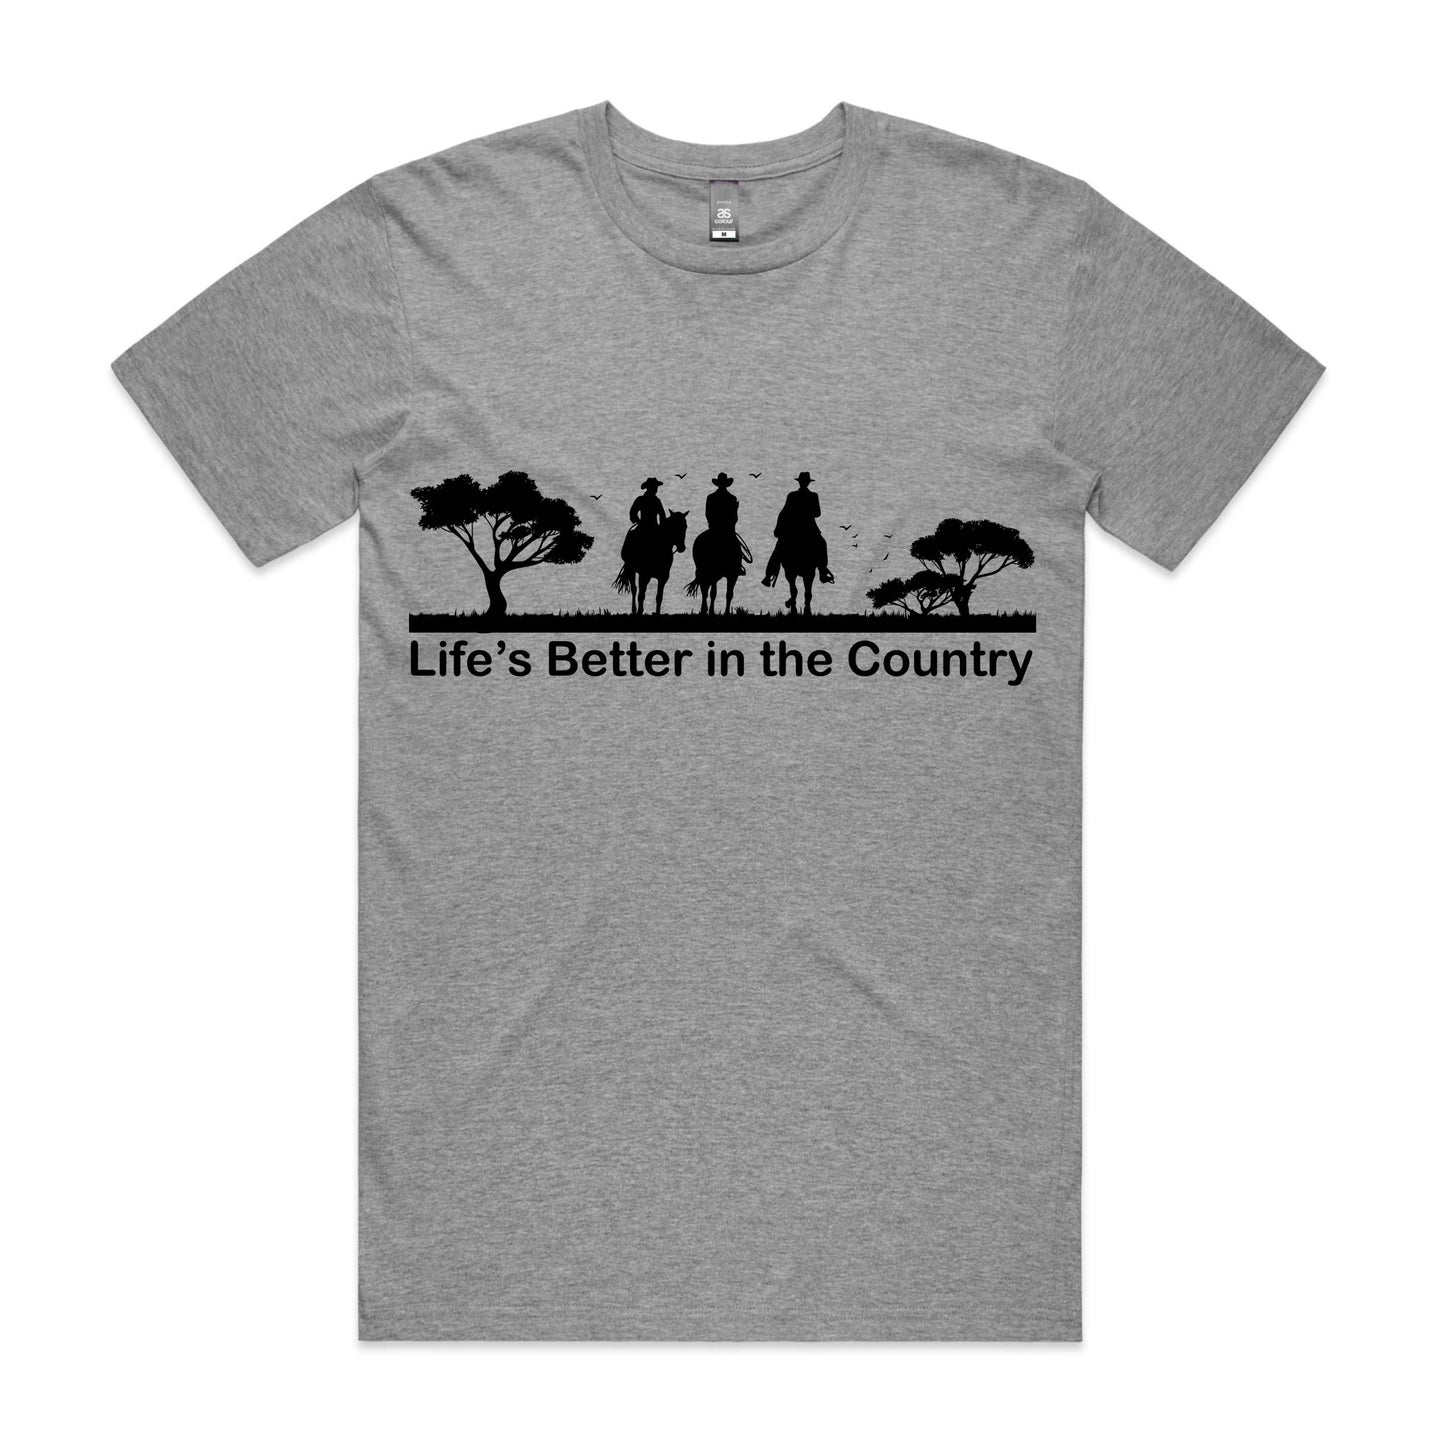 Hayco Men's Life's Better in the Country